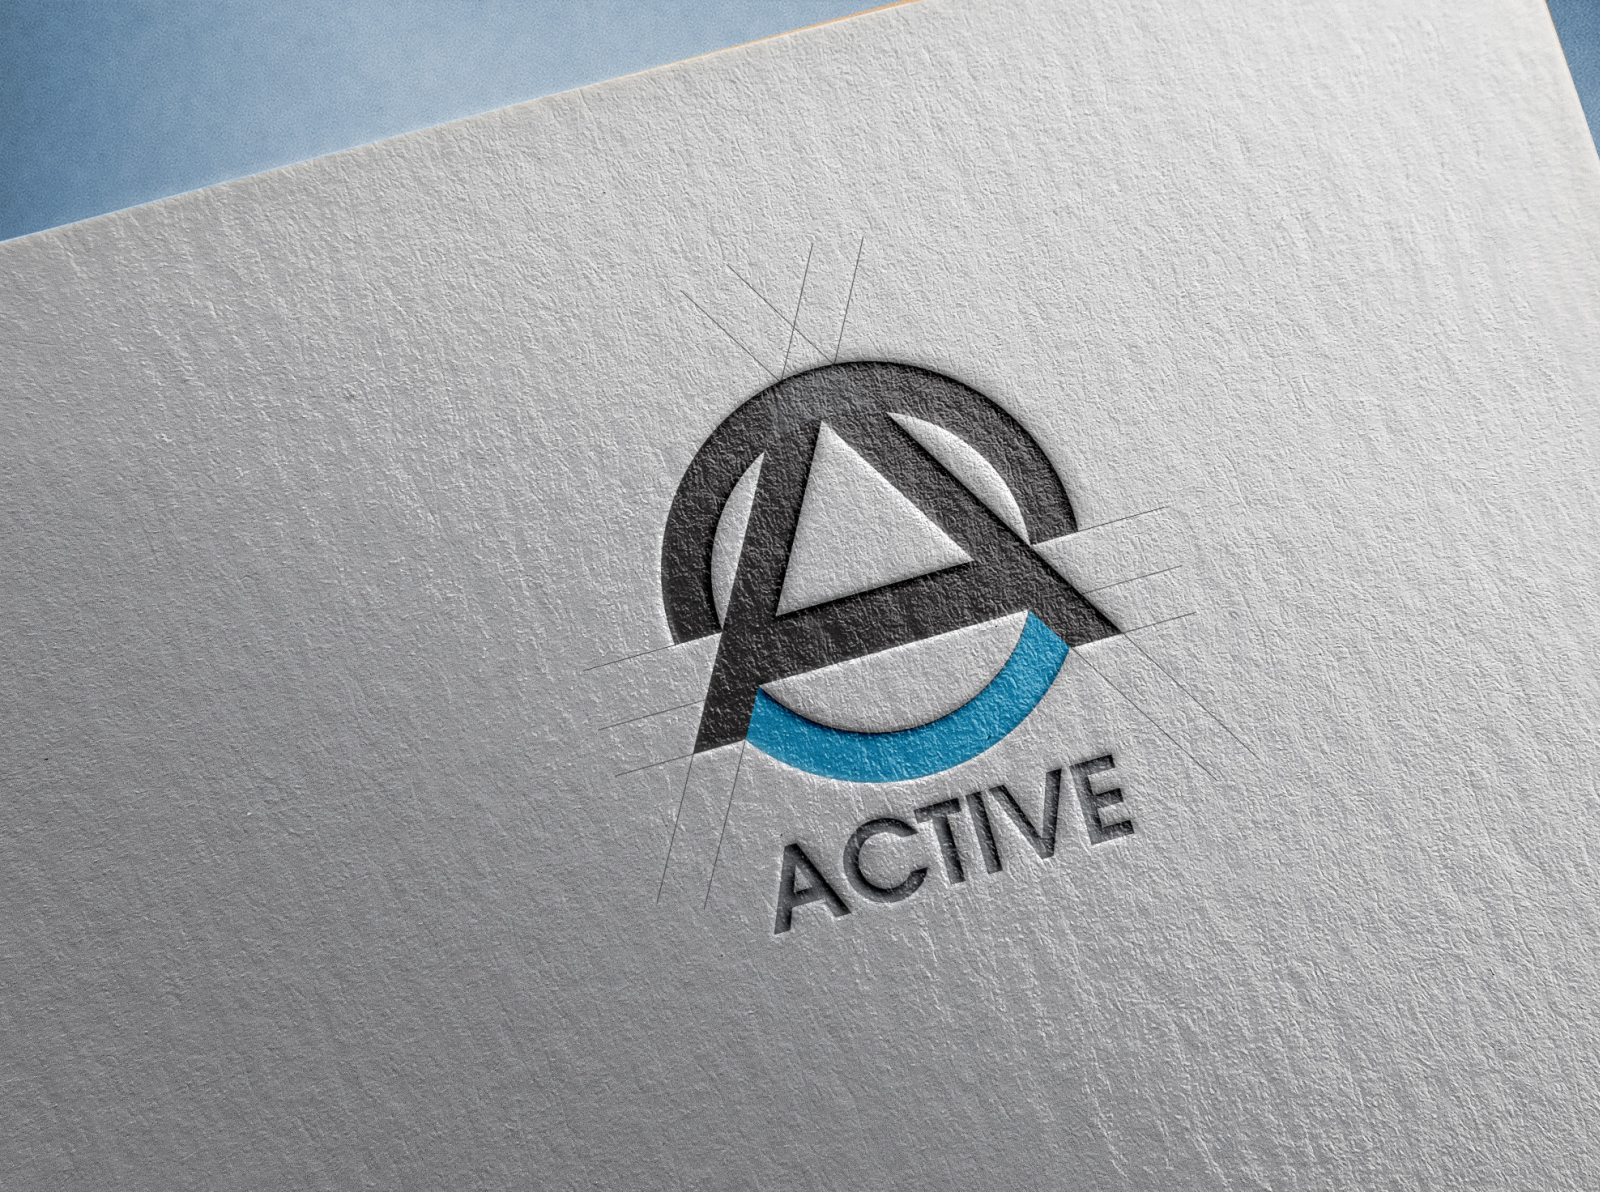 Letter a logo name active by Jubaer Ahammad Nayem on Dribbble